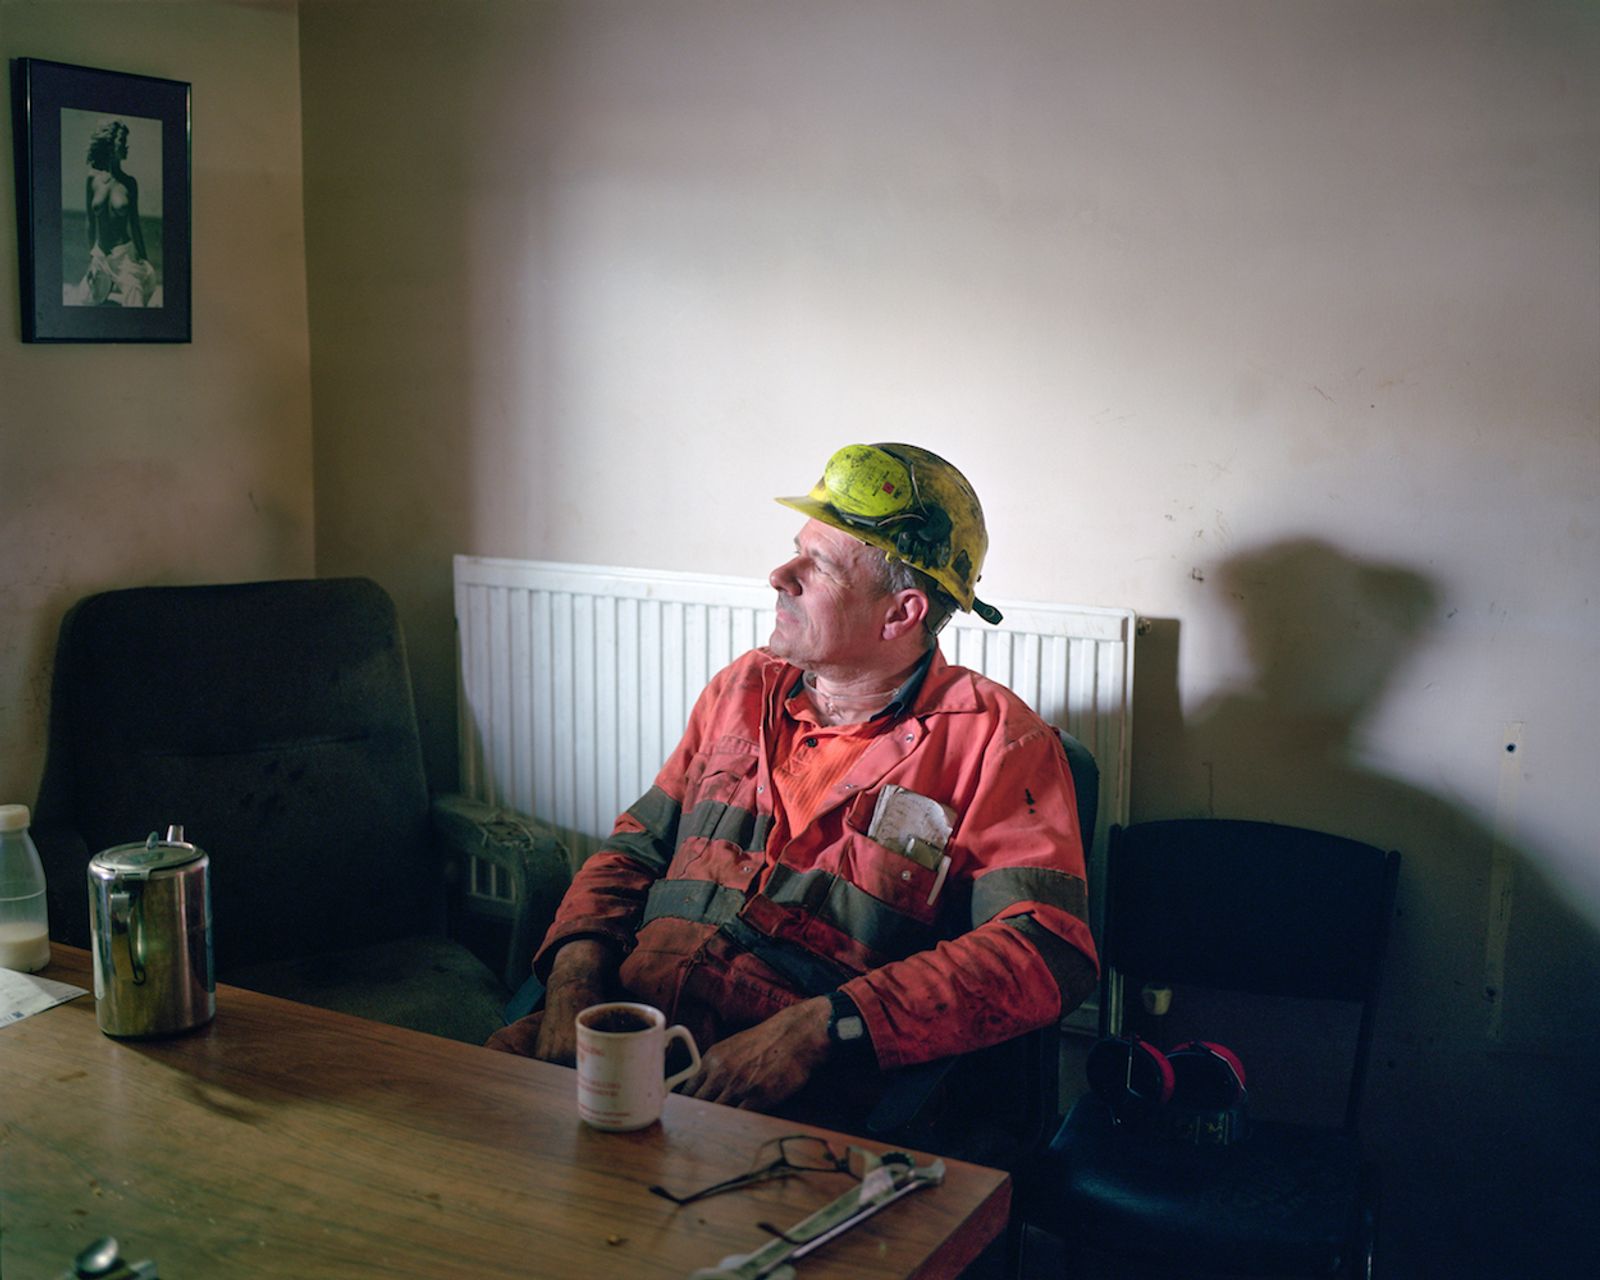 © David Severn - A mineworker taking a tea break at Thoresby Colliery, Nottinghamshire.